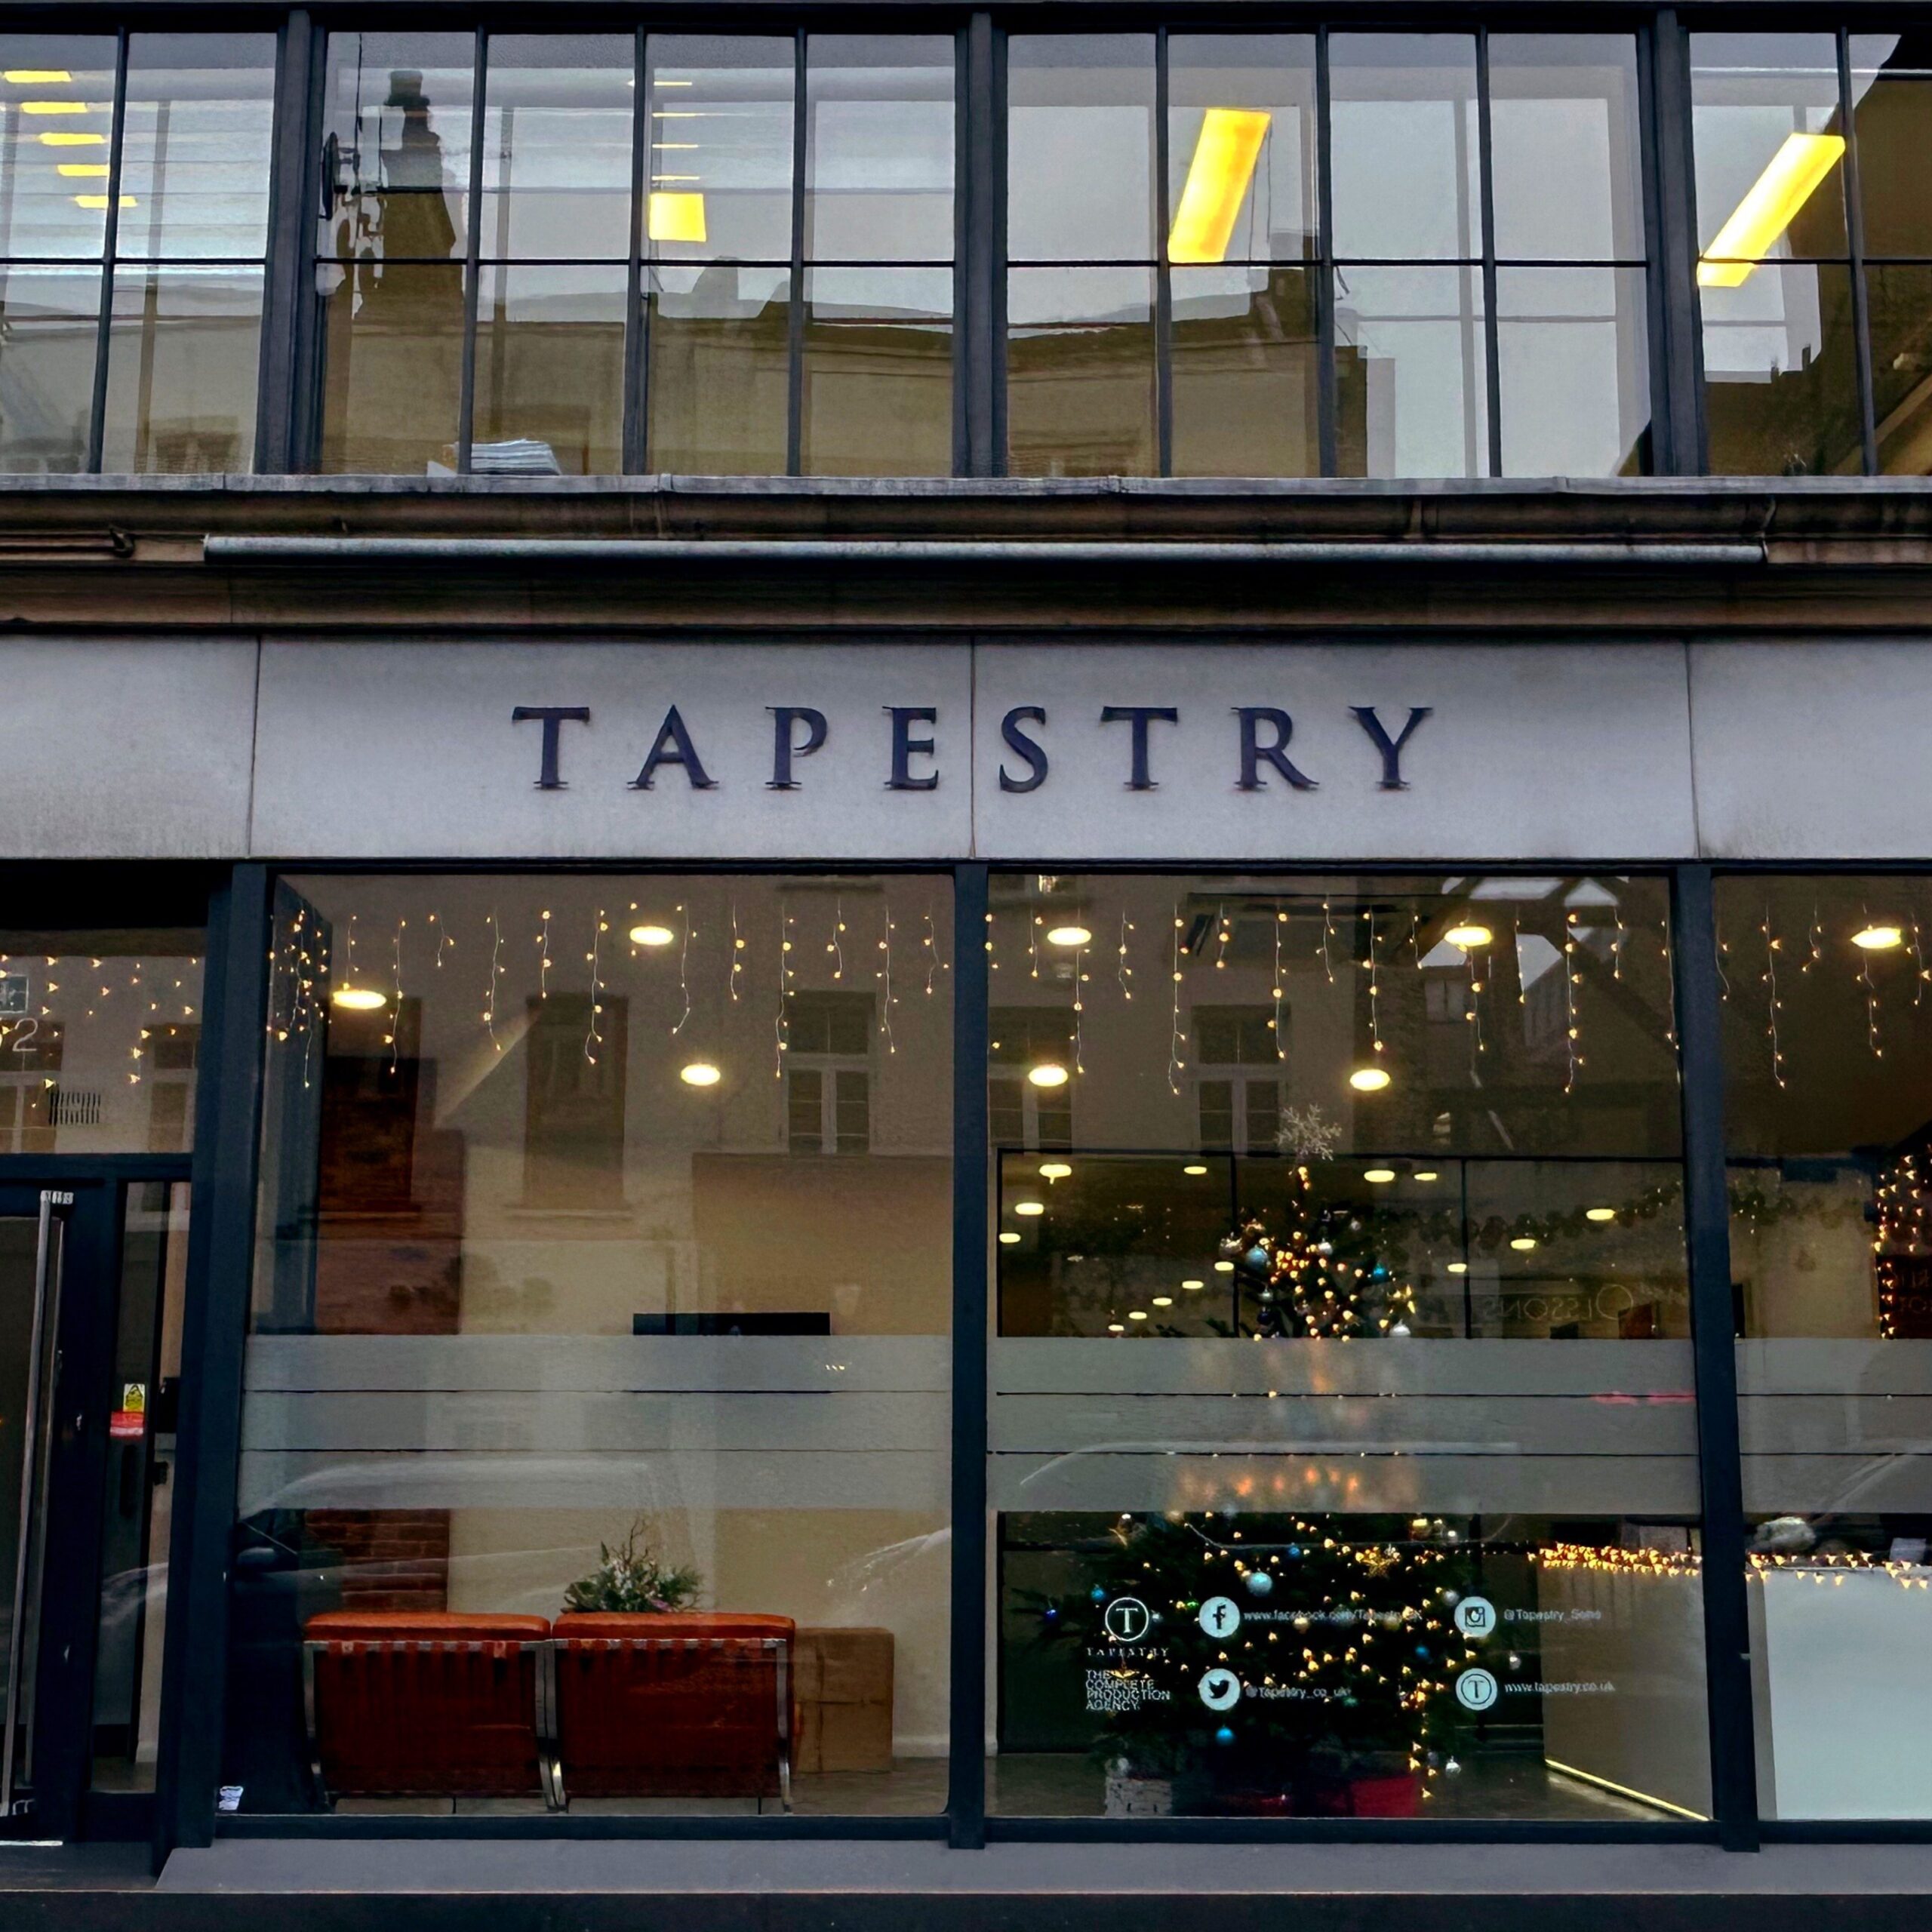 Tapestry-soho-frith-street-central-london-production-agency-house-photography-retouching-christmas-winter-festive-decorations-office-tree-lights-takealook-countdown-20moresleepstogo